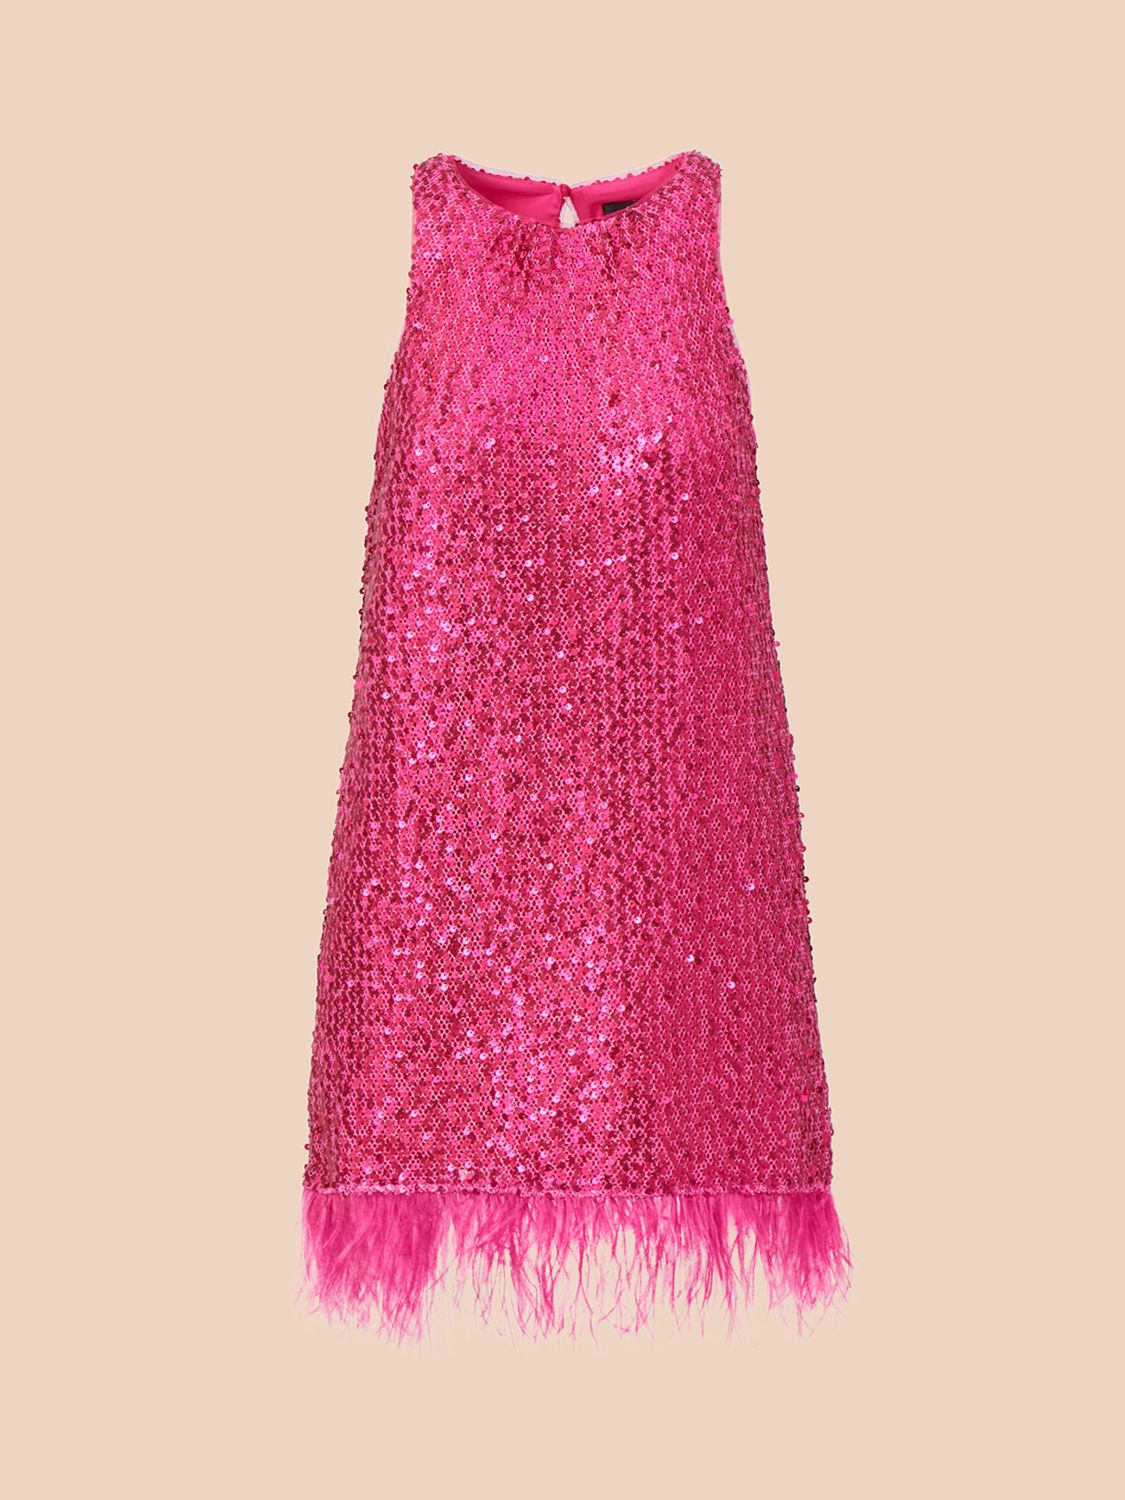 Buy Aidan by Adrianna Papell Sequin Halter Swing Dress, Hot Pink Online at johnlewis.com